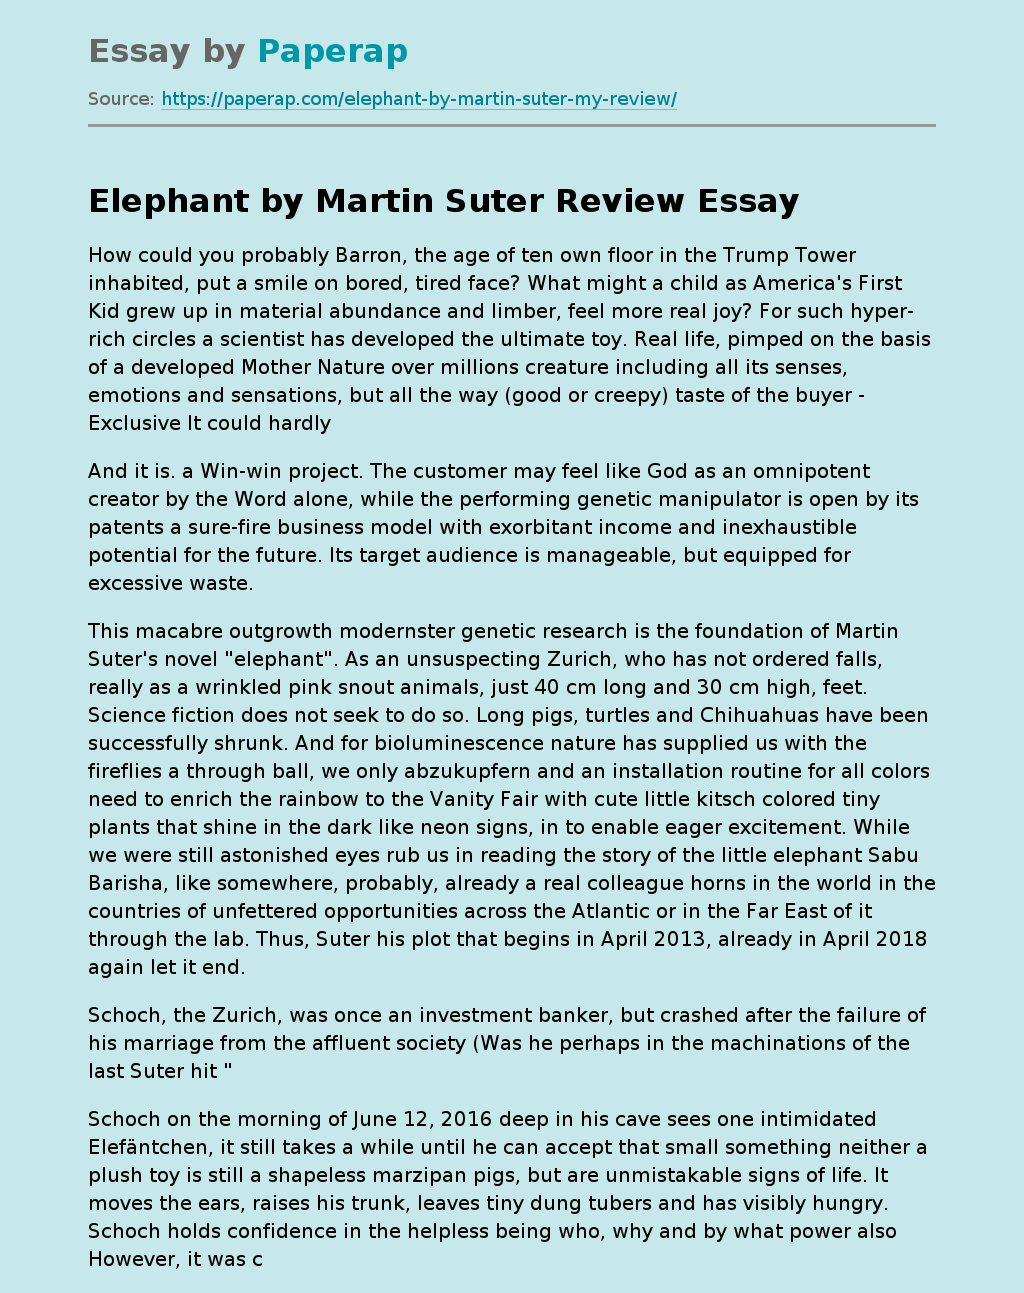 Book "Elephant" by Martin Suter